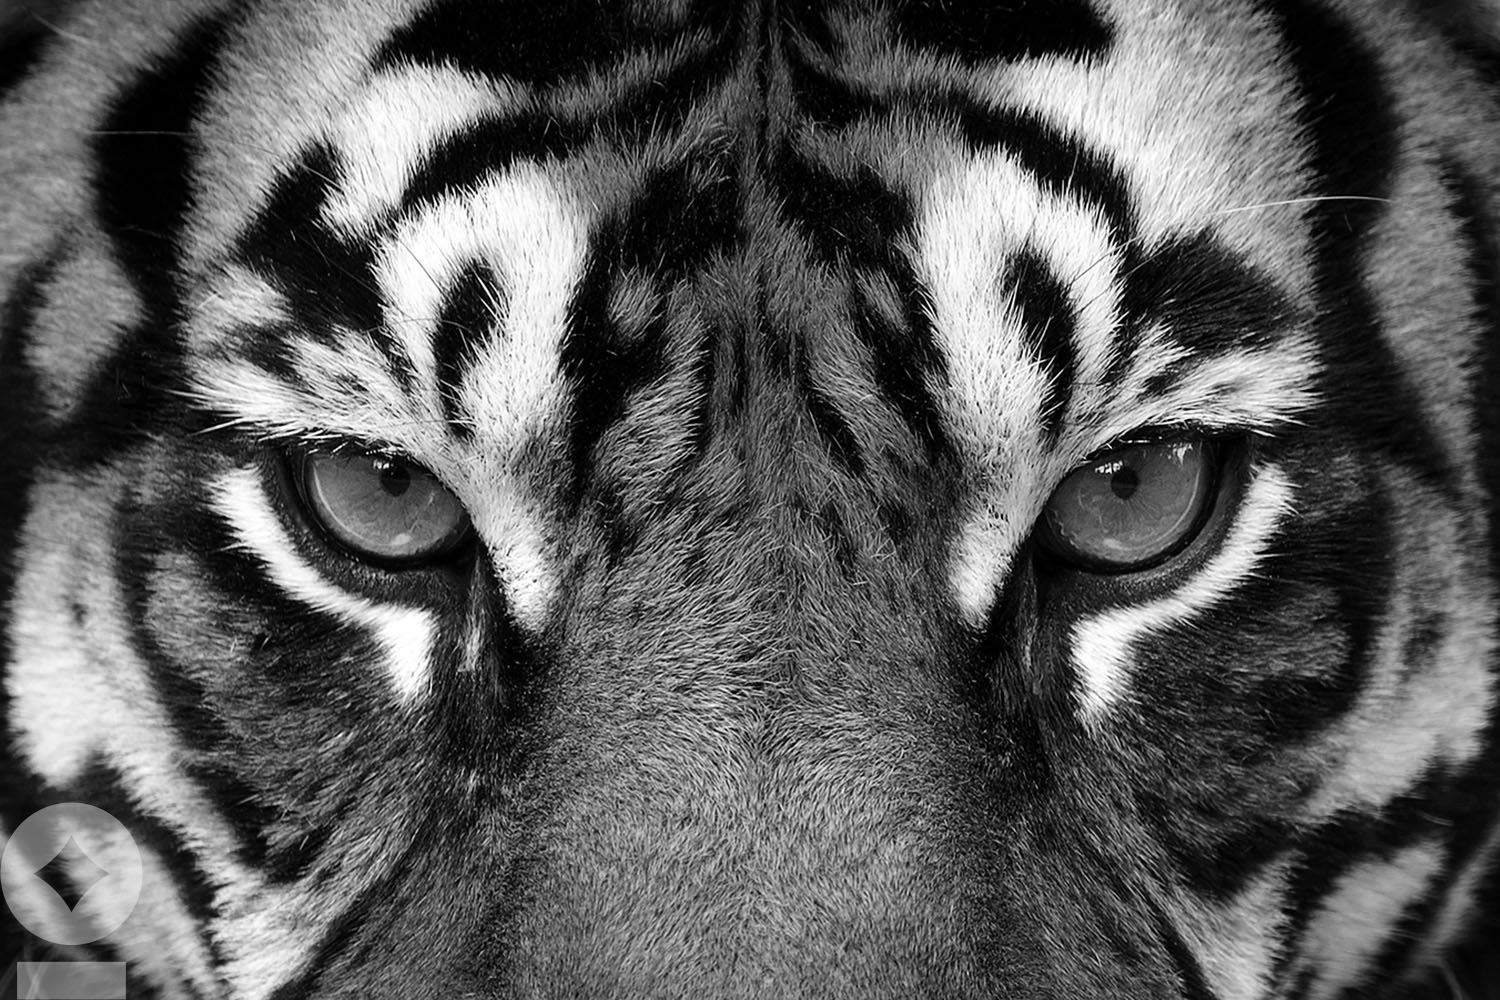 “Eye of the Tiger”